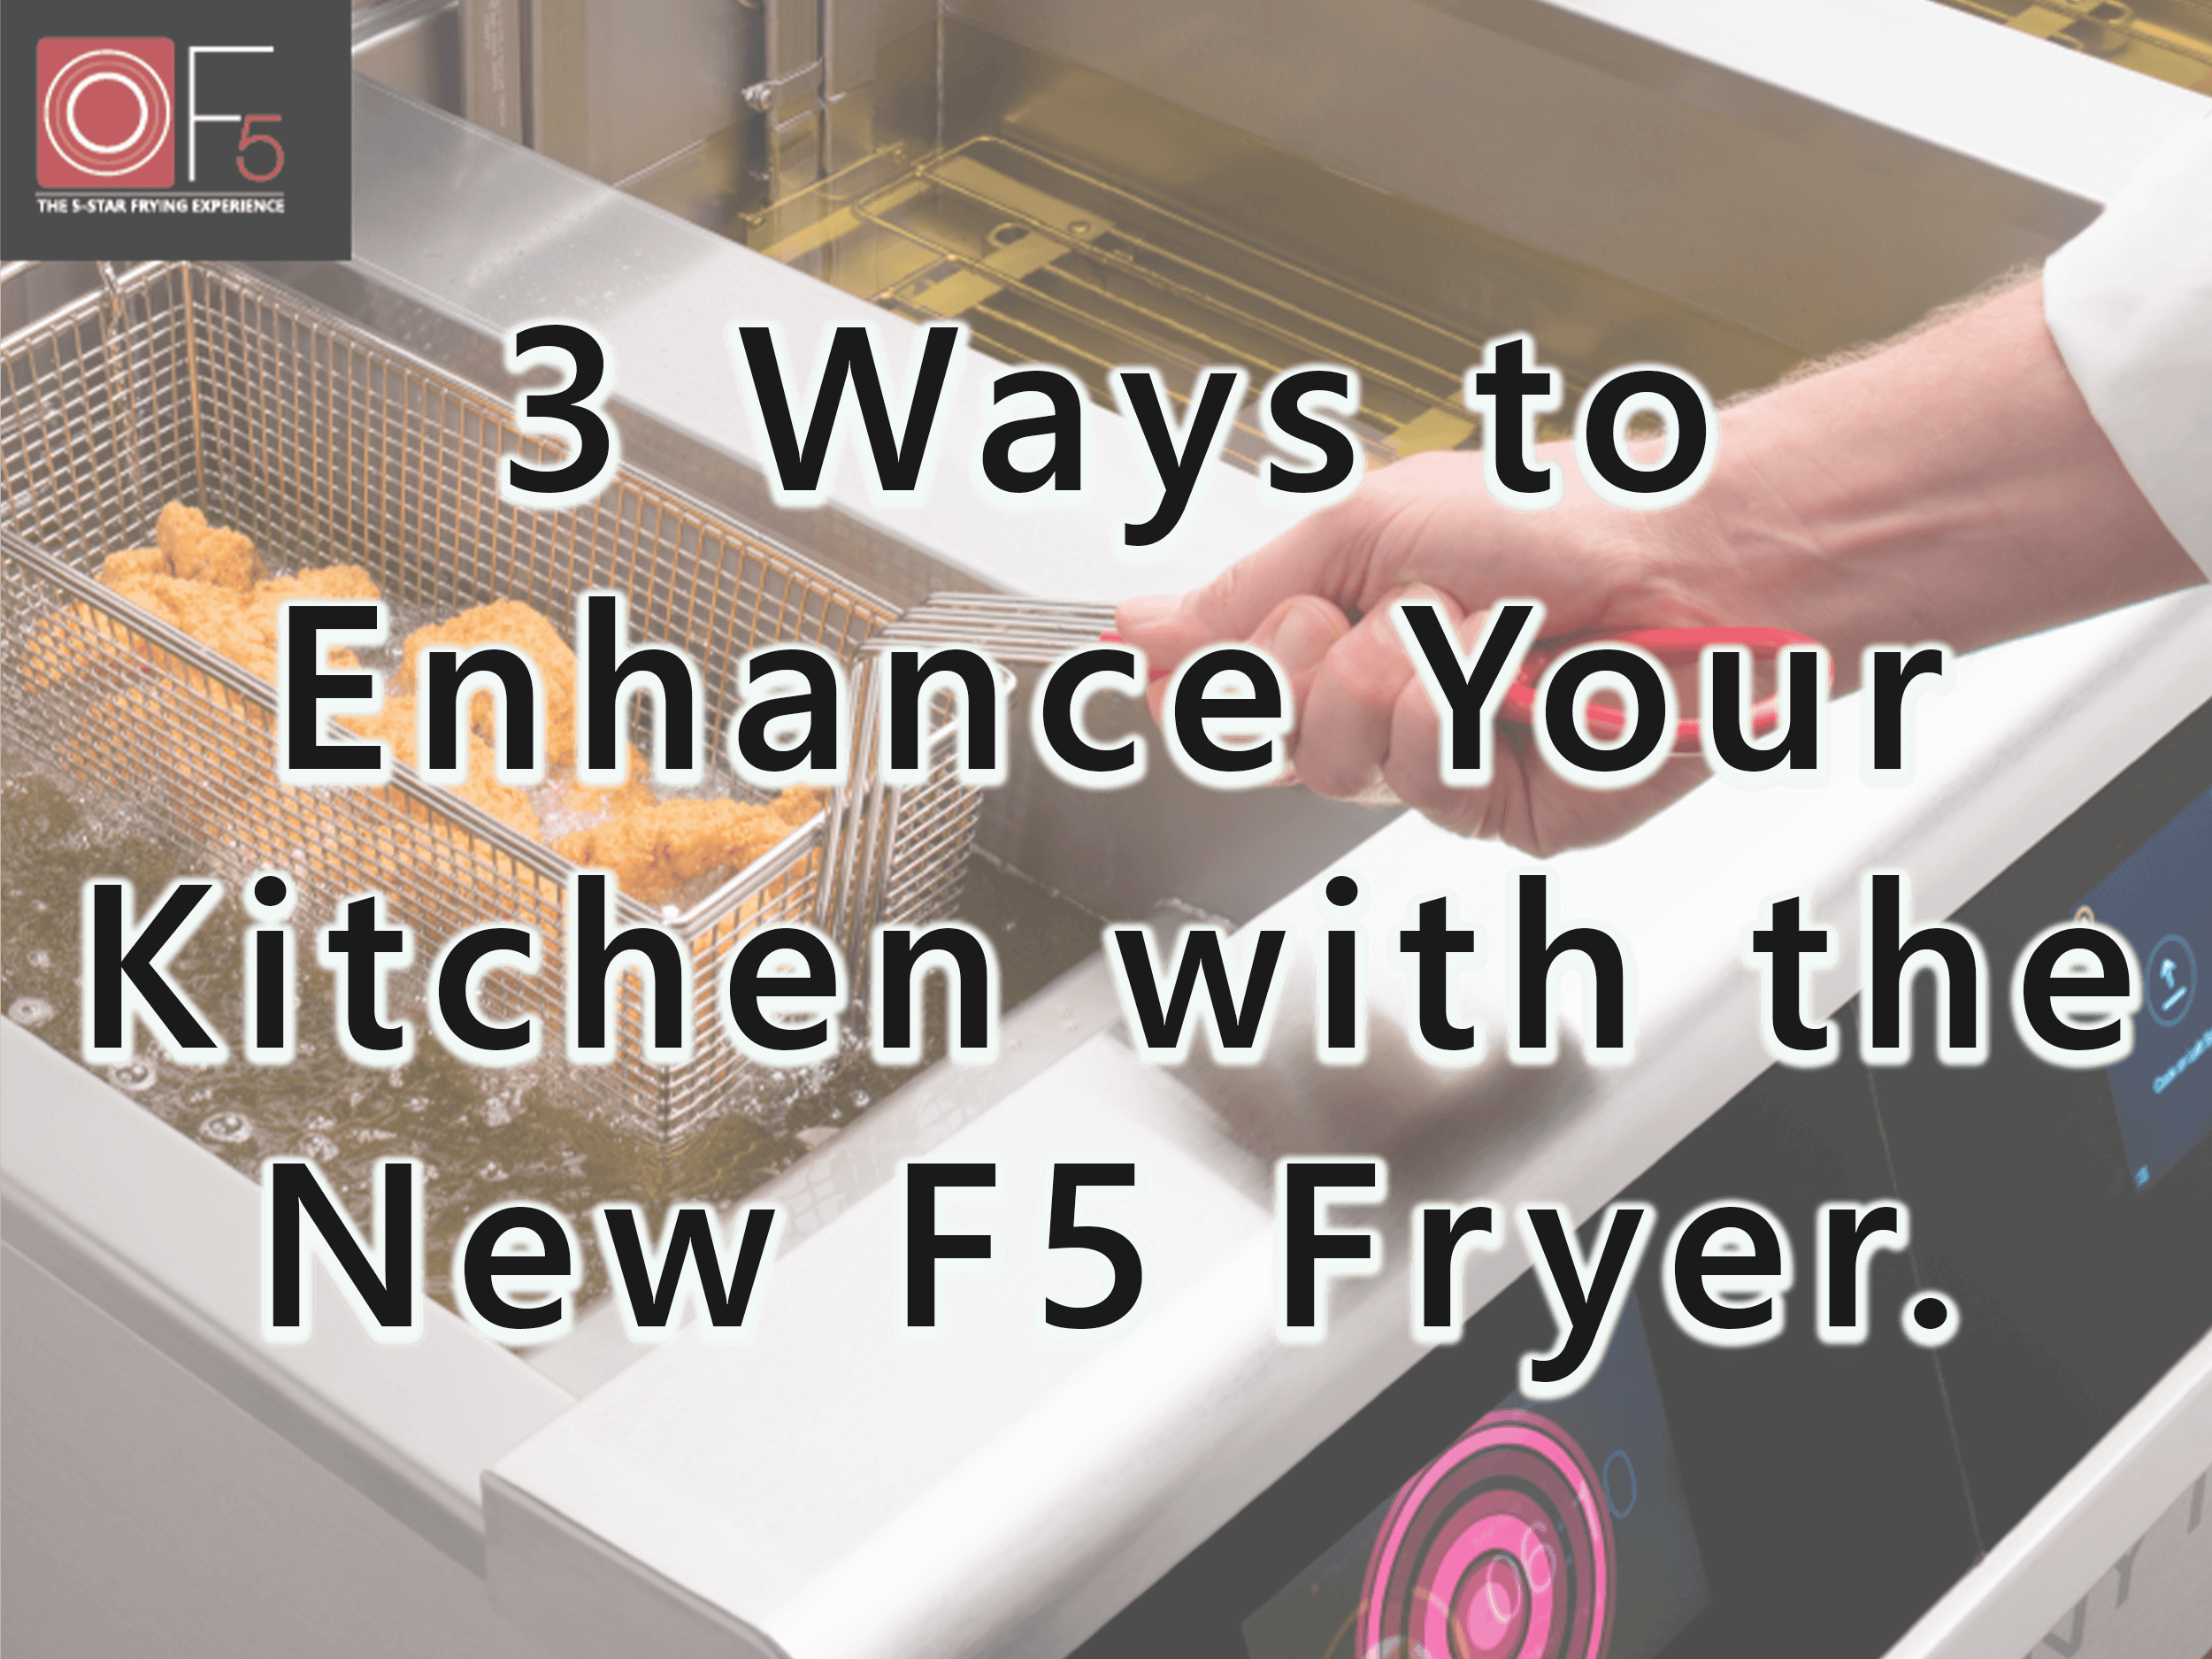 3 Ways to Enhance Your Kitchen with the New F5 Fryer. Home Featured